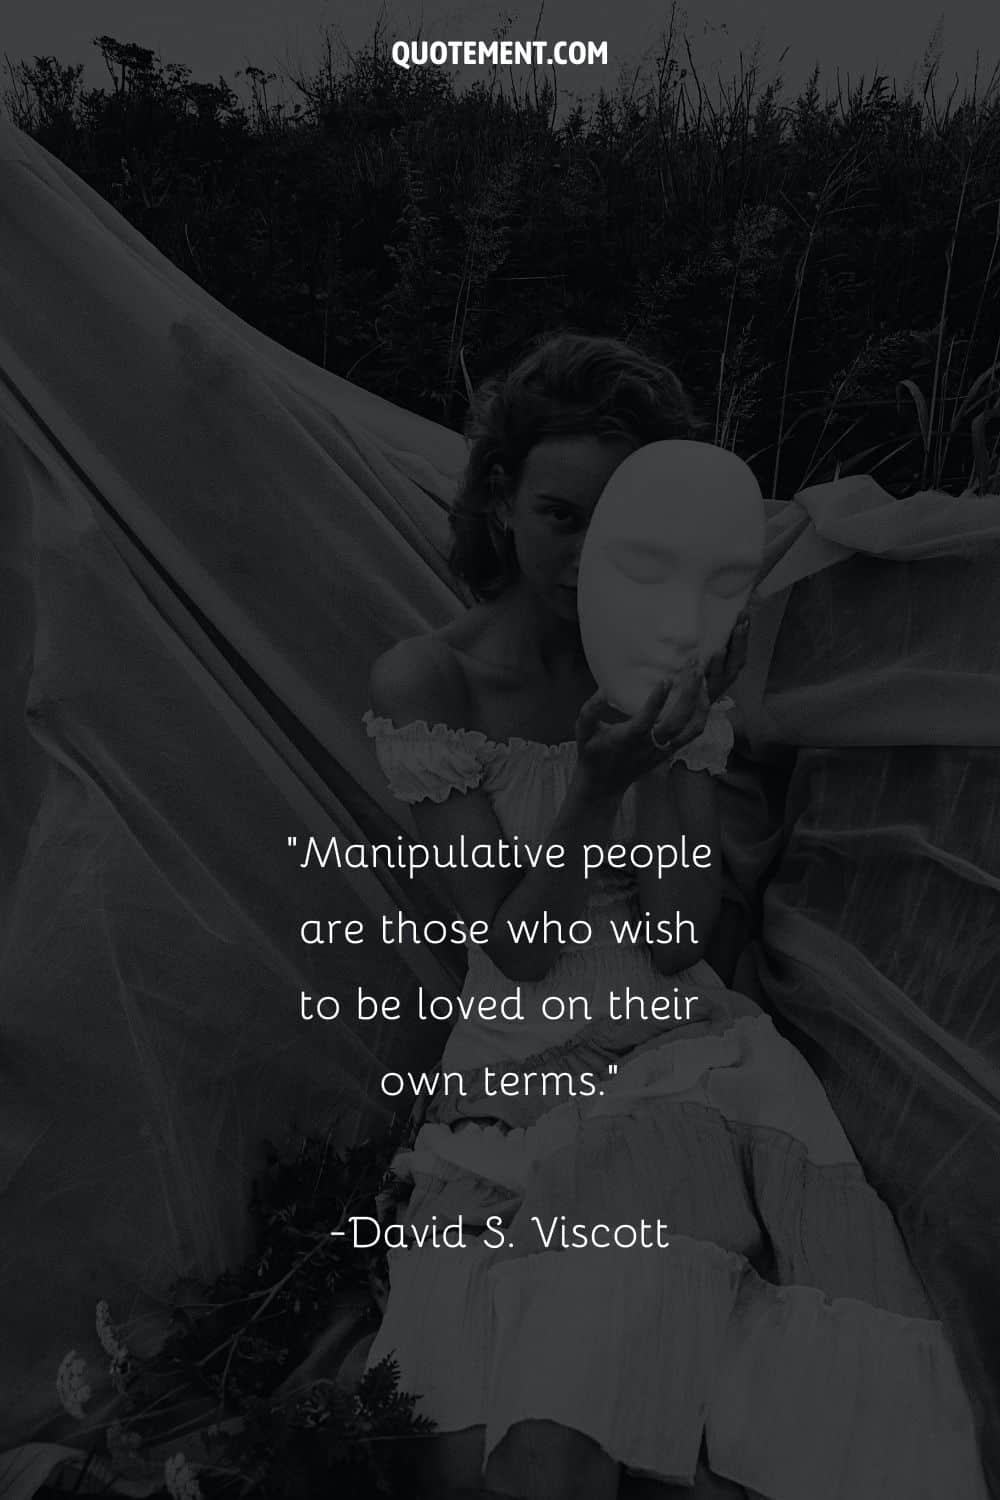 girl with a mask image representing manipulator quote